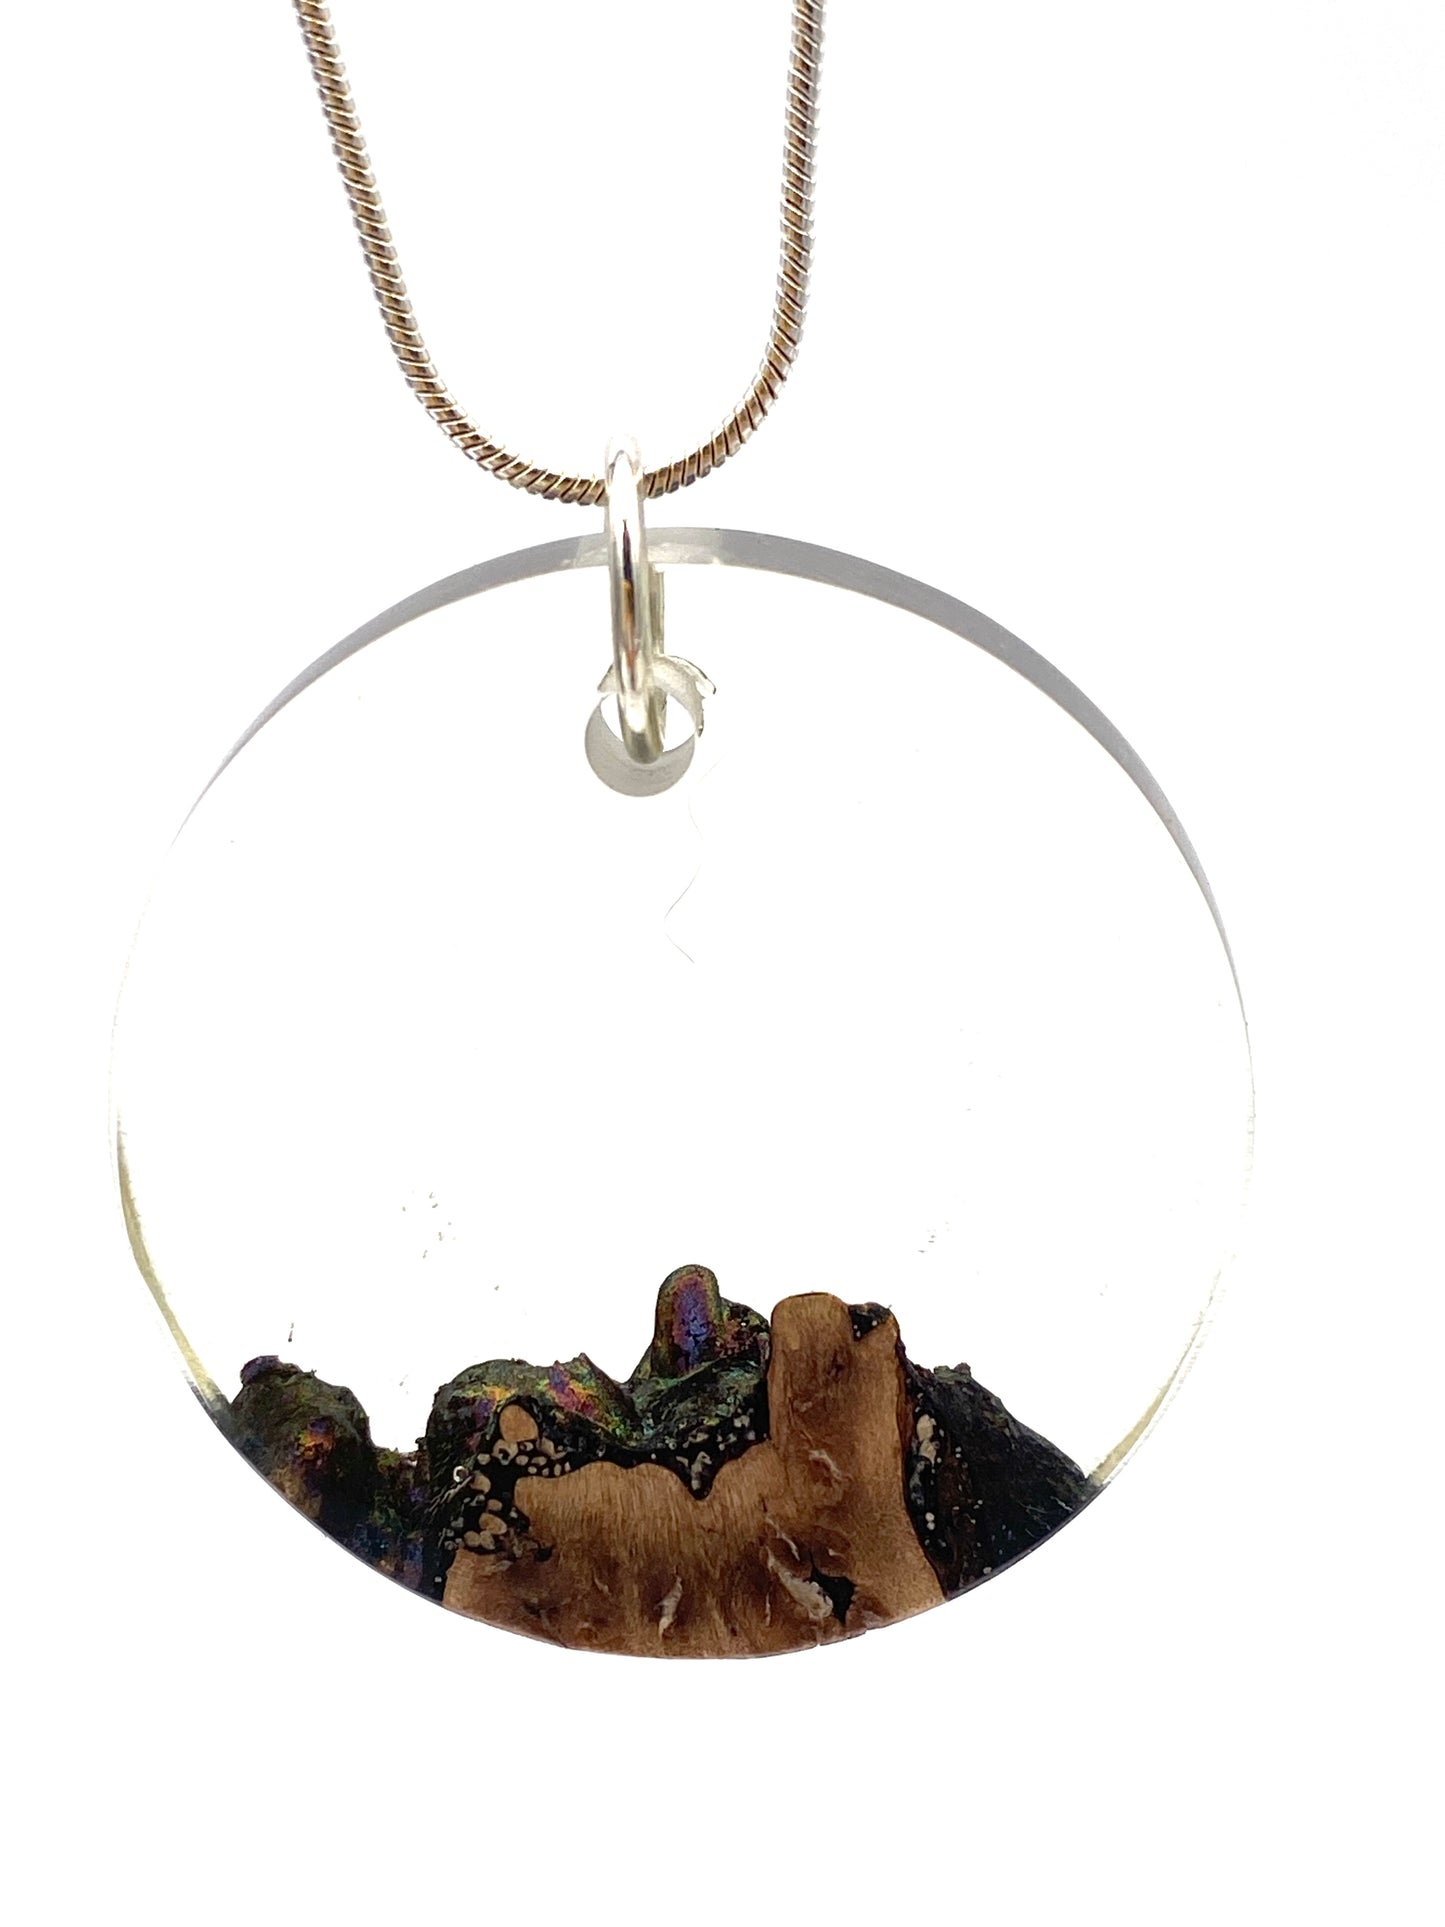 Maple Burl and Epoxy Resin Necklace with Chameleon Color Shifting Pigment